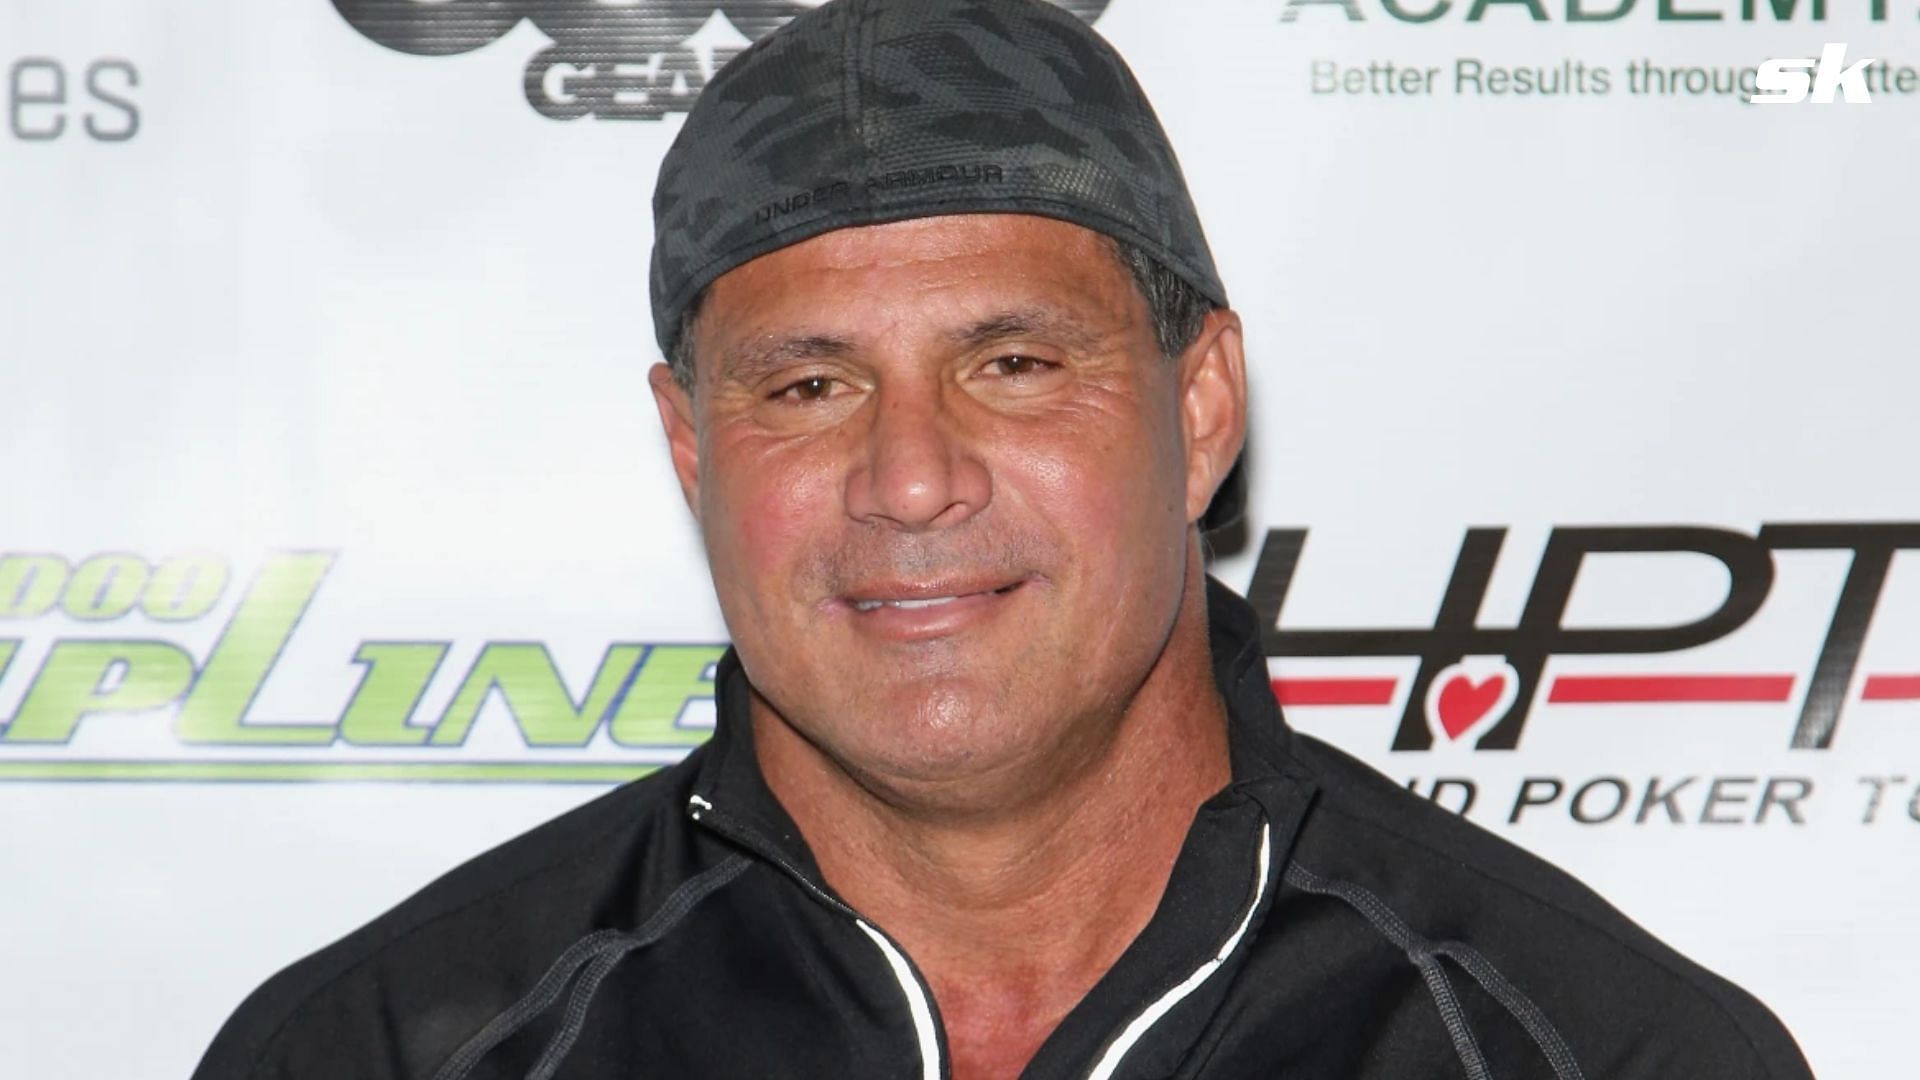 Jose Canseco's ex-wife: I sleep with didn't Alex Rodriguez